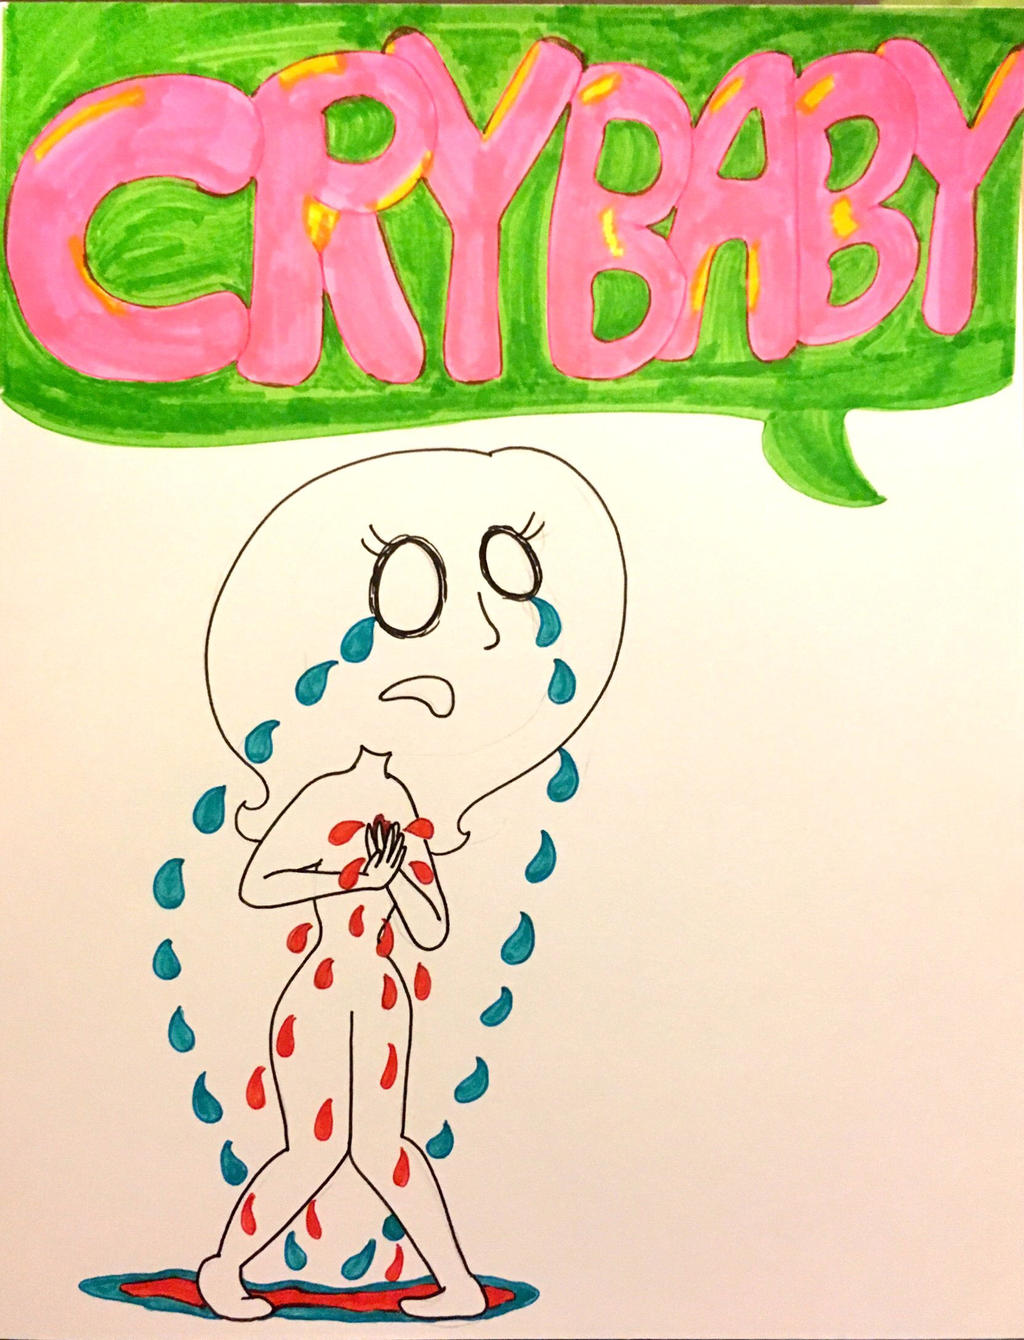 CRYBABY